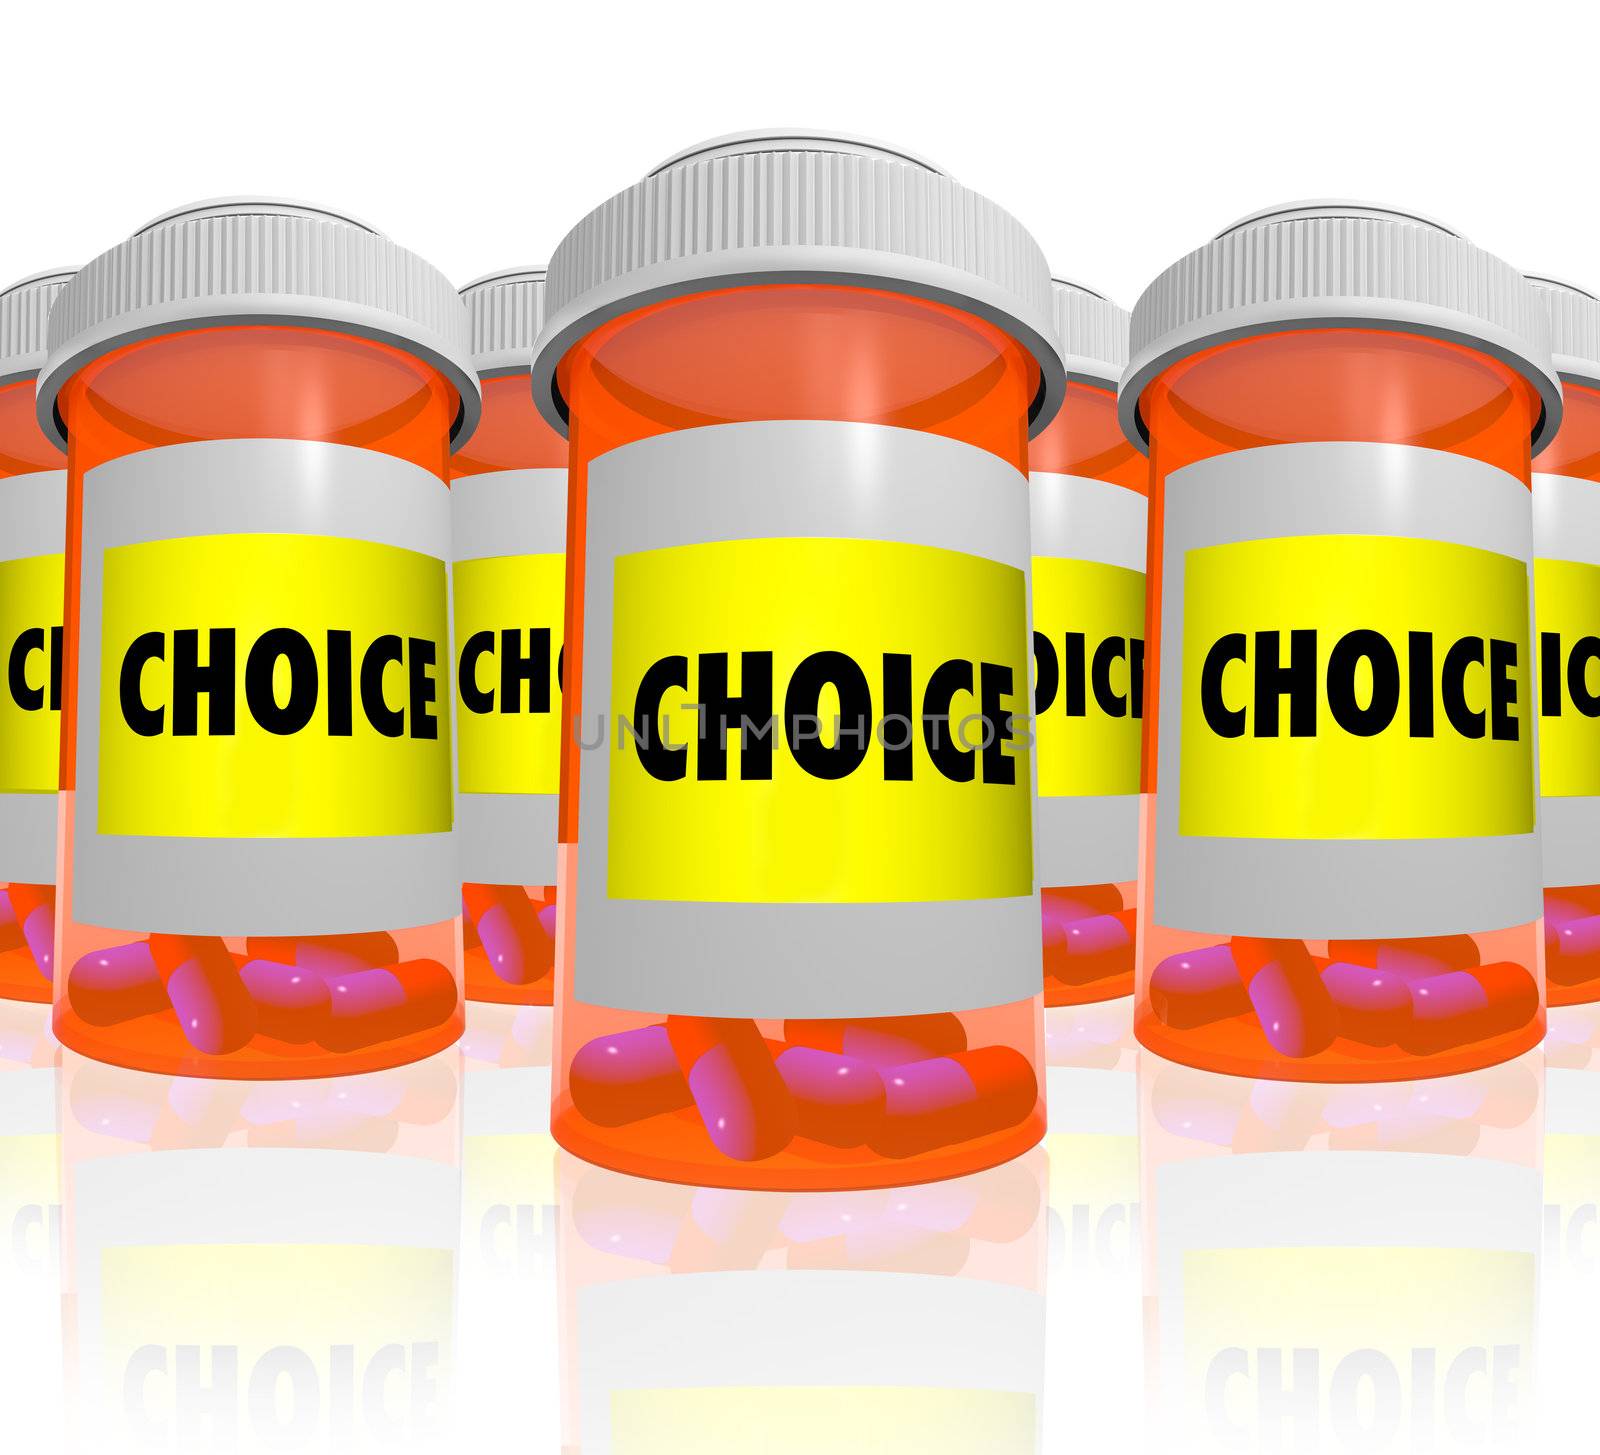 Many orange prescription bottles, each with a label that reads Choice, representing the many options available to you when searching for the best medicine to alleviate your health care condition or ailment